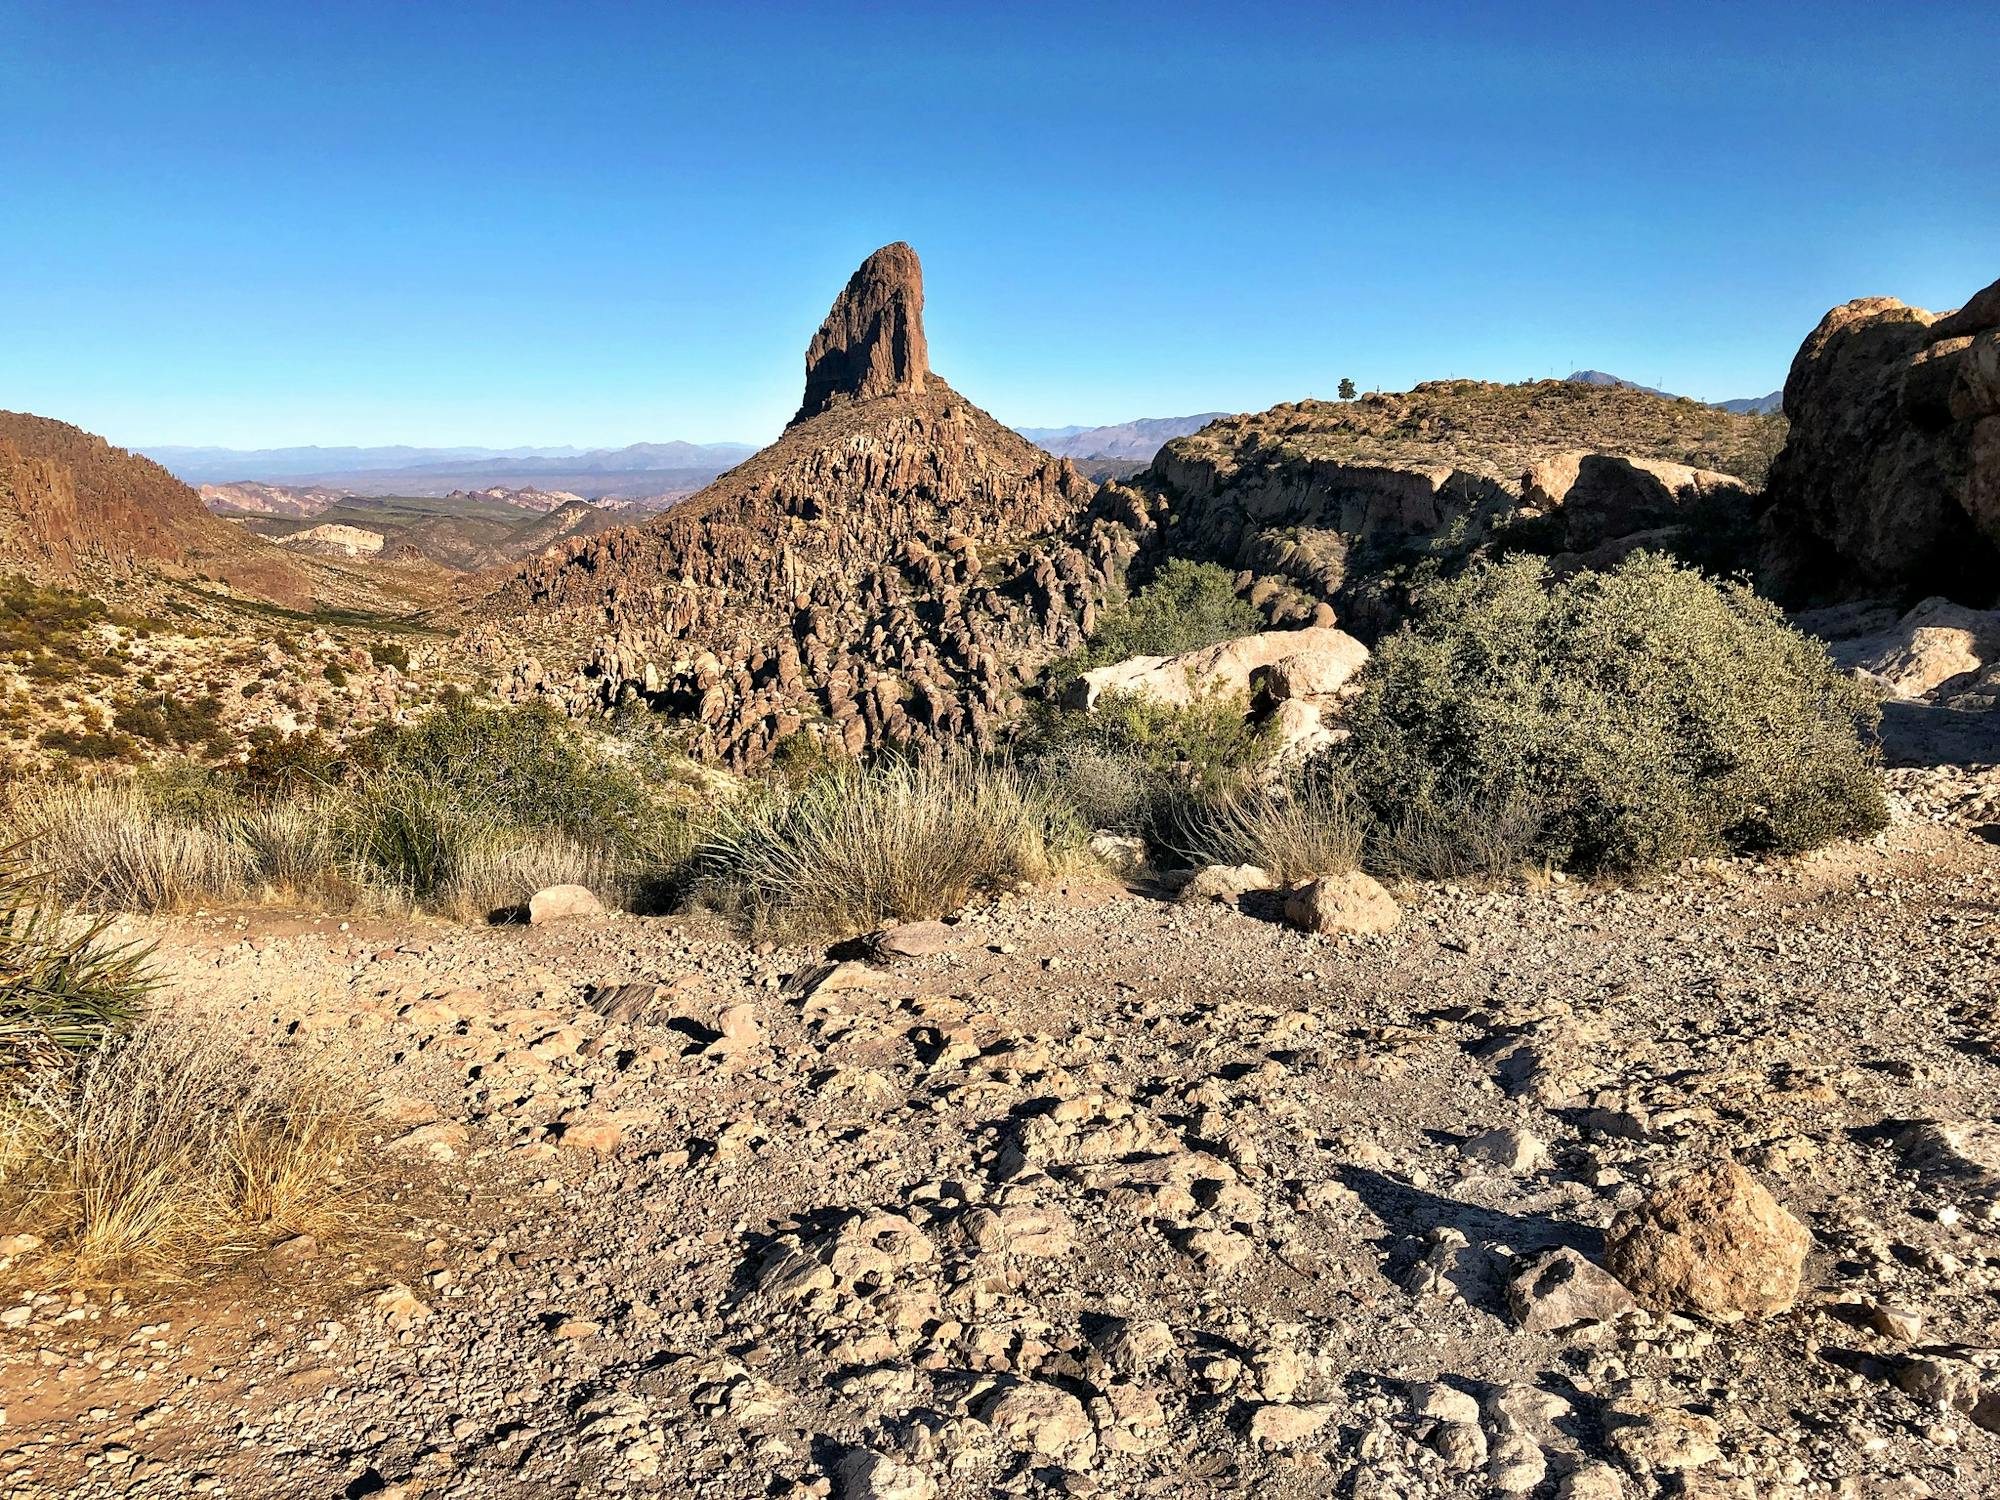 View of the Weavers Needle from Fremont Saddle